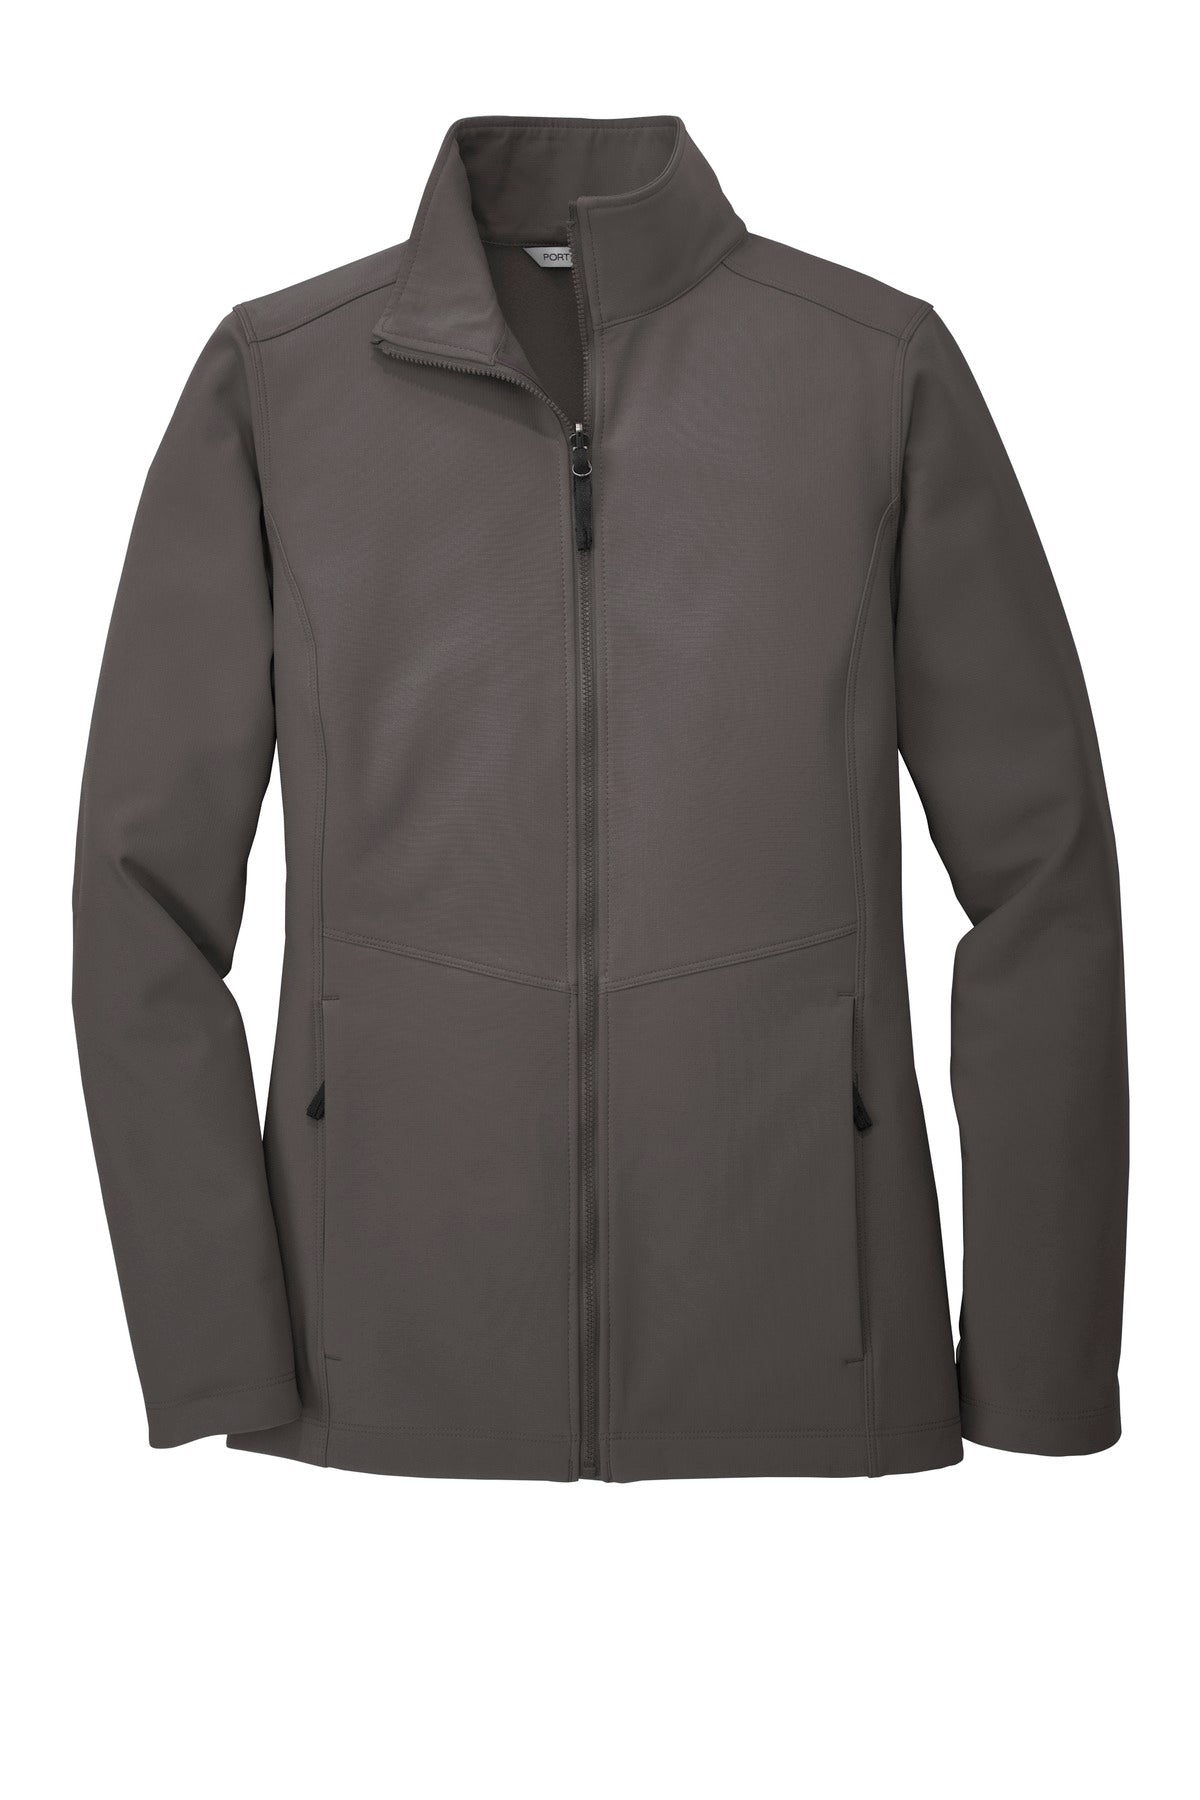 Port Authority Ladies Collective Soft Shell Jacket. L901